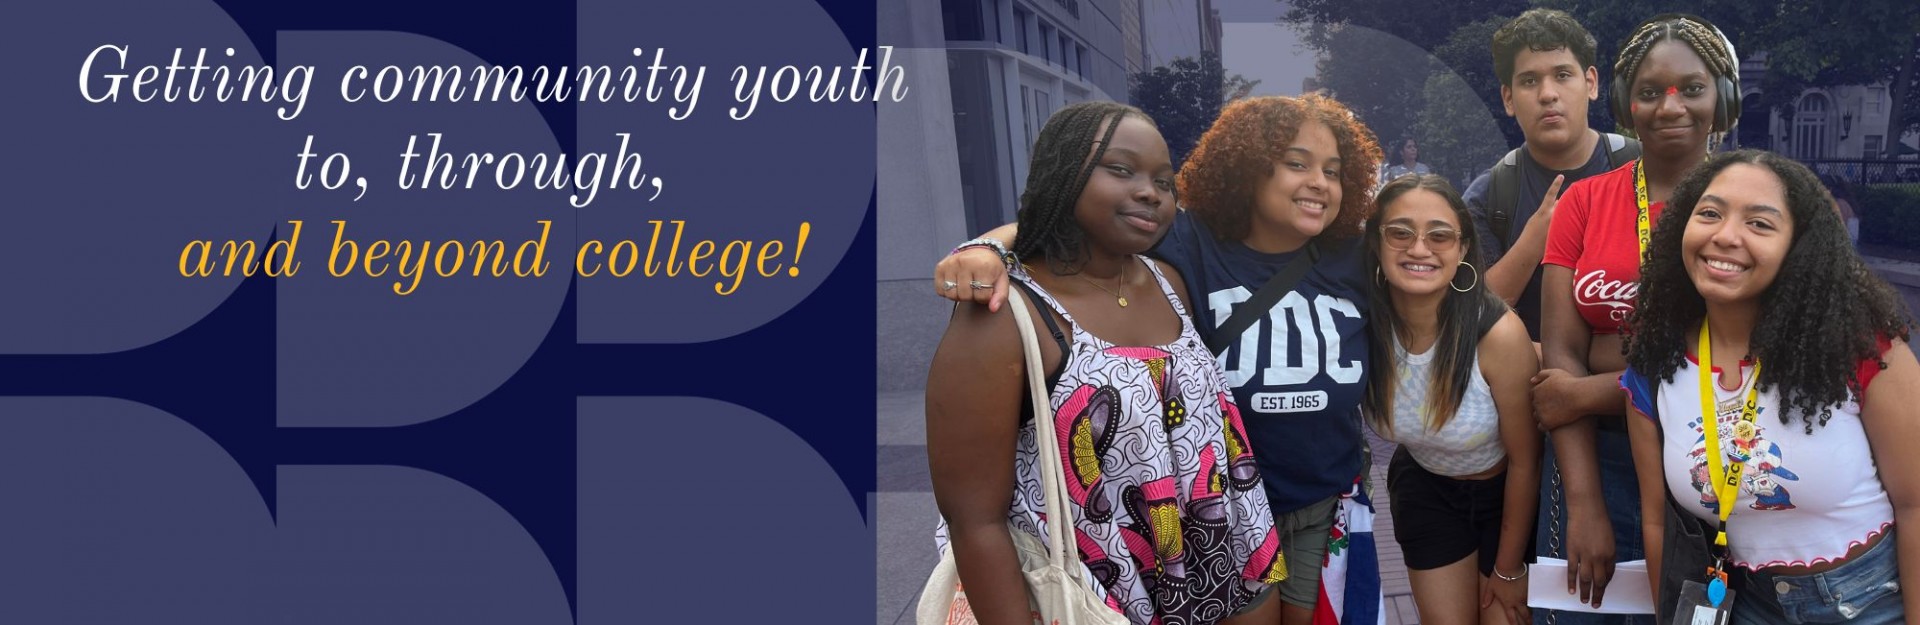 Getting community youth to, through, and beyond college!